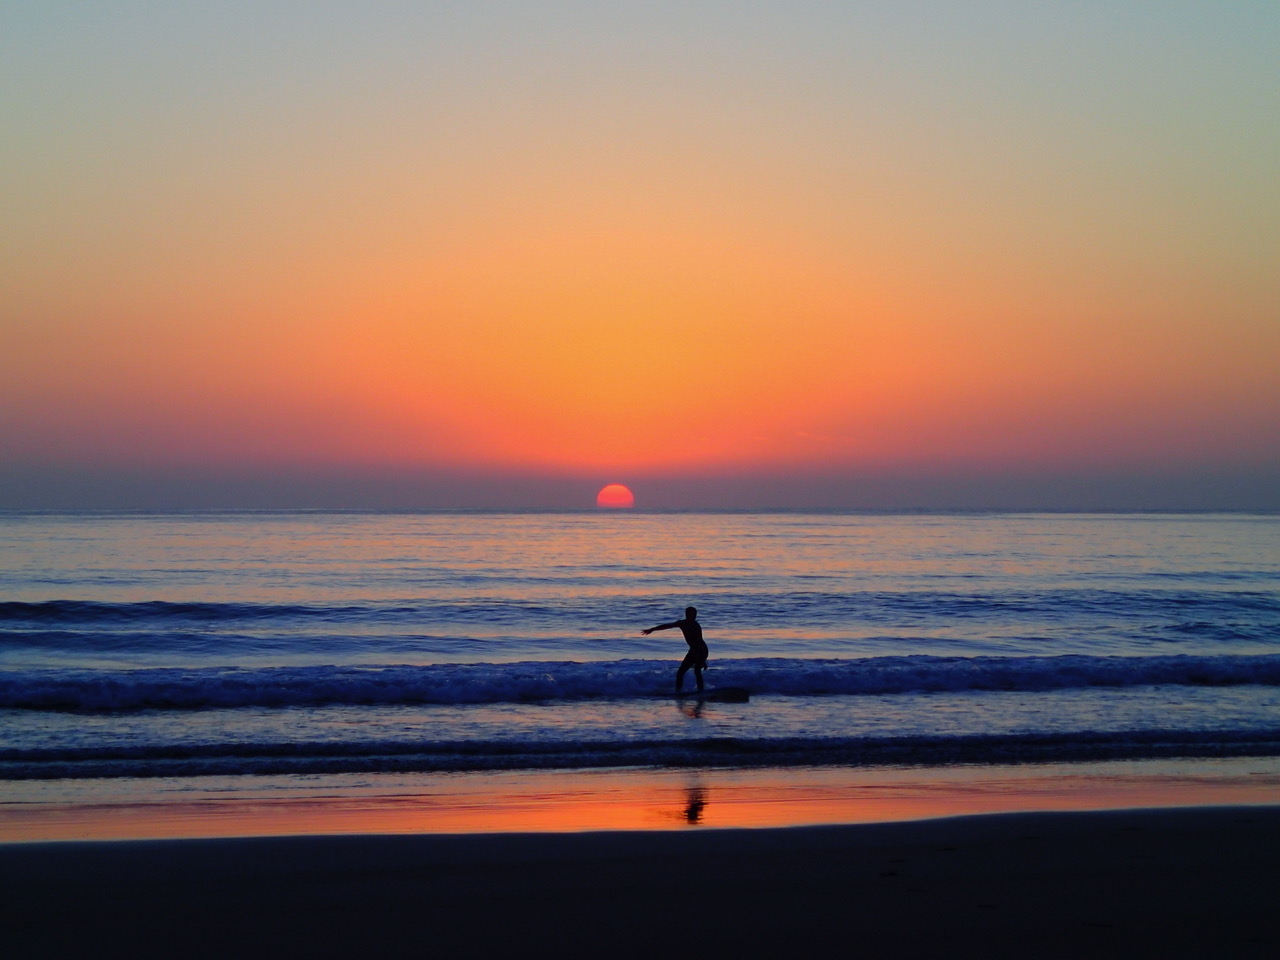 Beautiful sunset over the ocean with silhouette of person standing on surfboard riding a wave